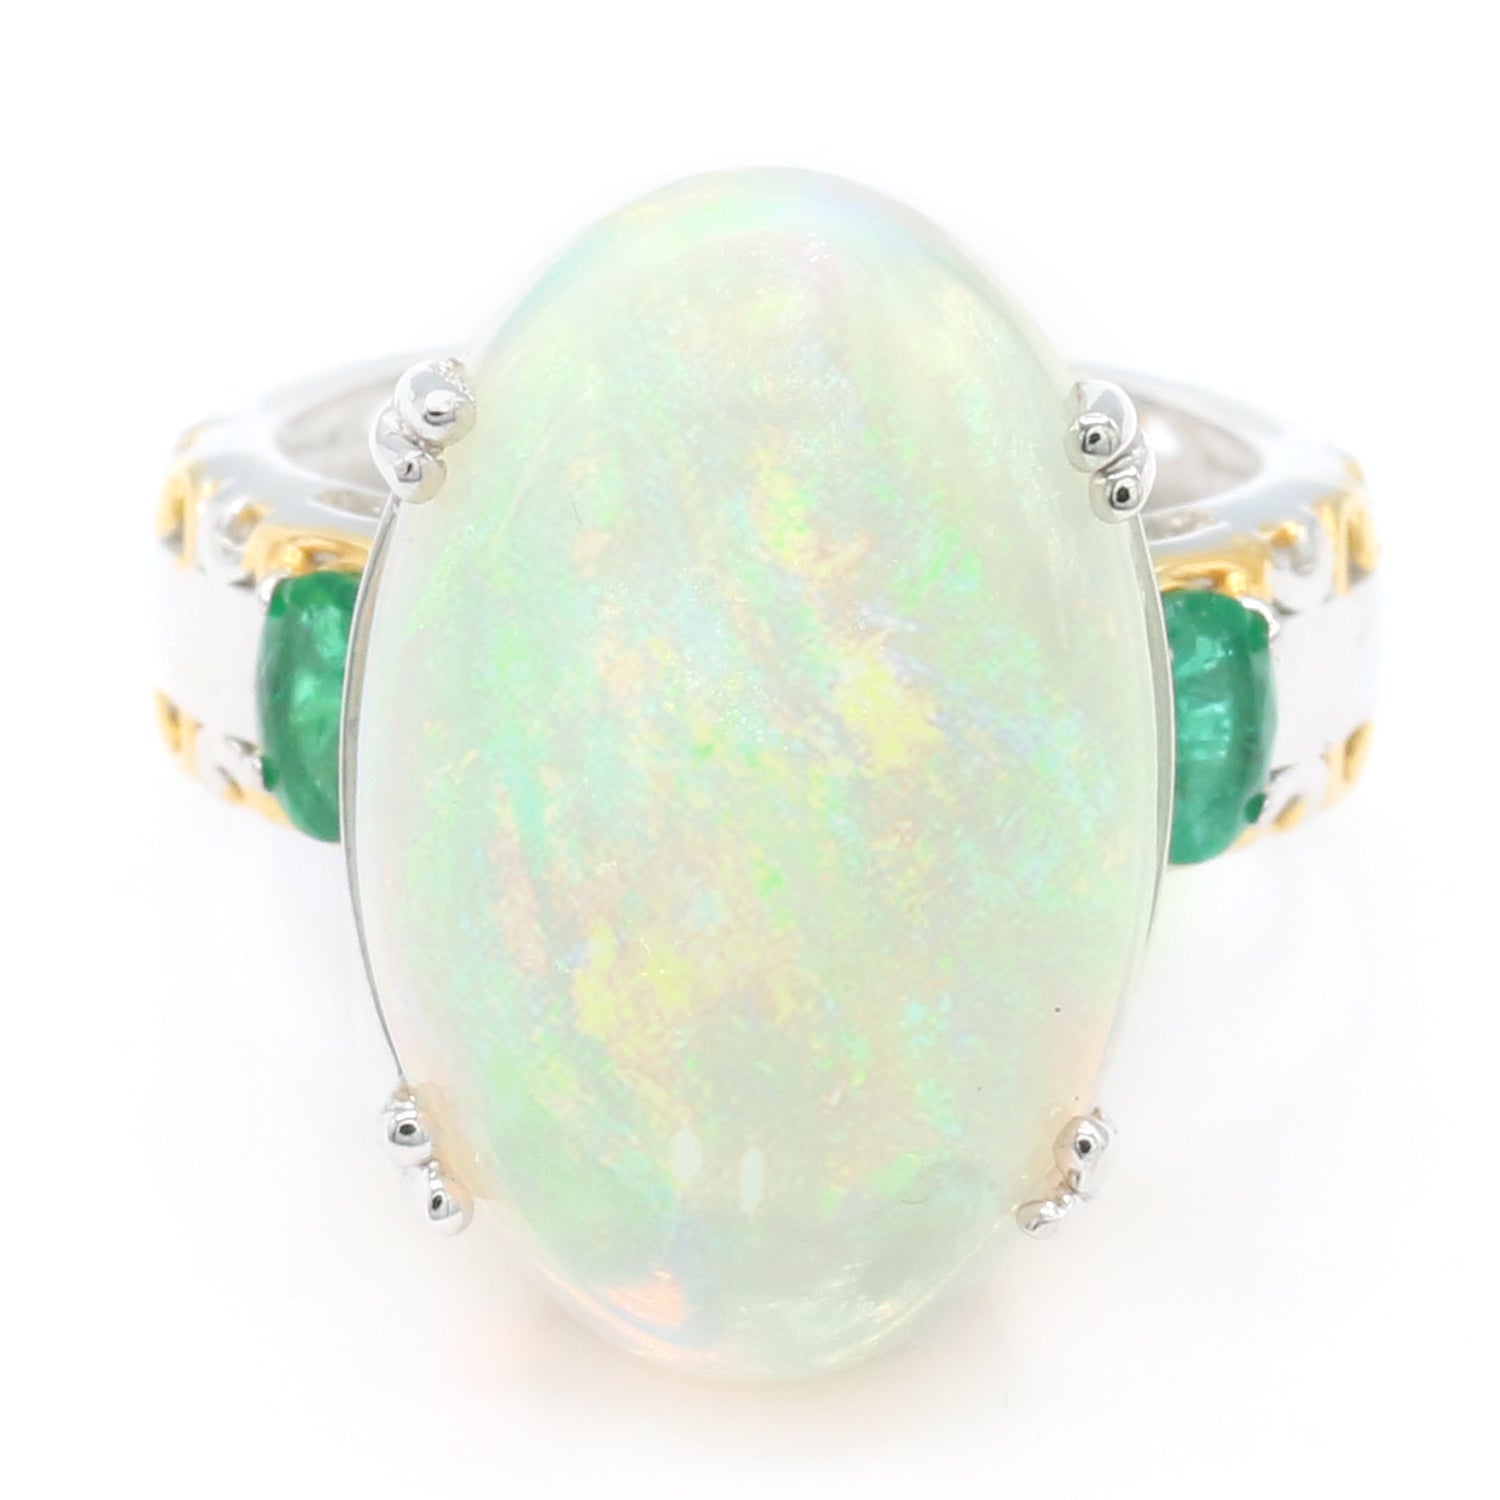 Limited Edition Gems en Vogue Luxe, One-of-a-Kind 15.04ctw Ethiopian Opal & Emerald Ring